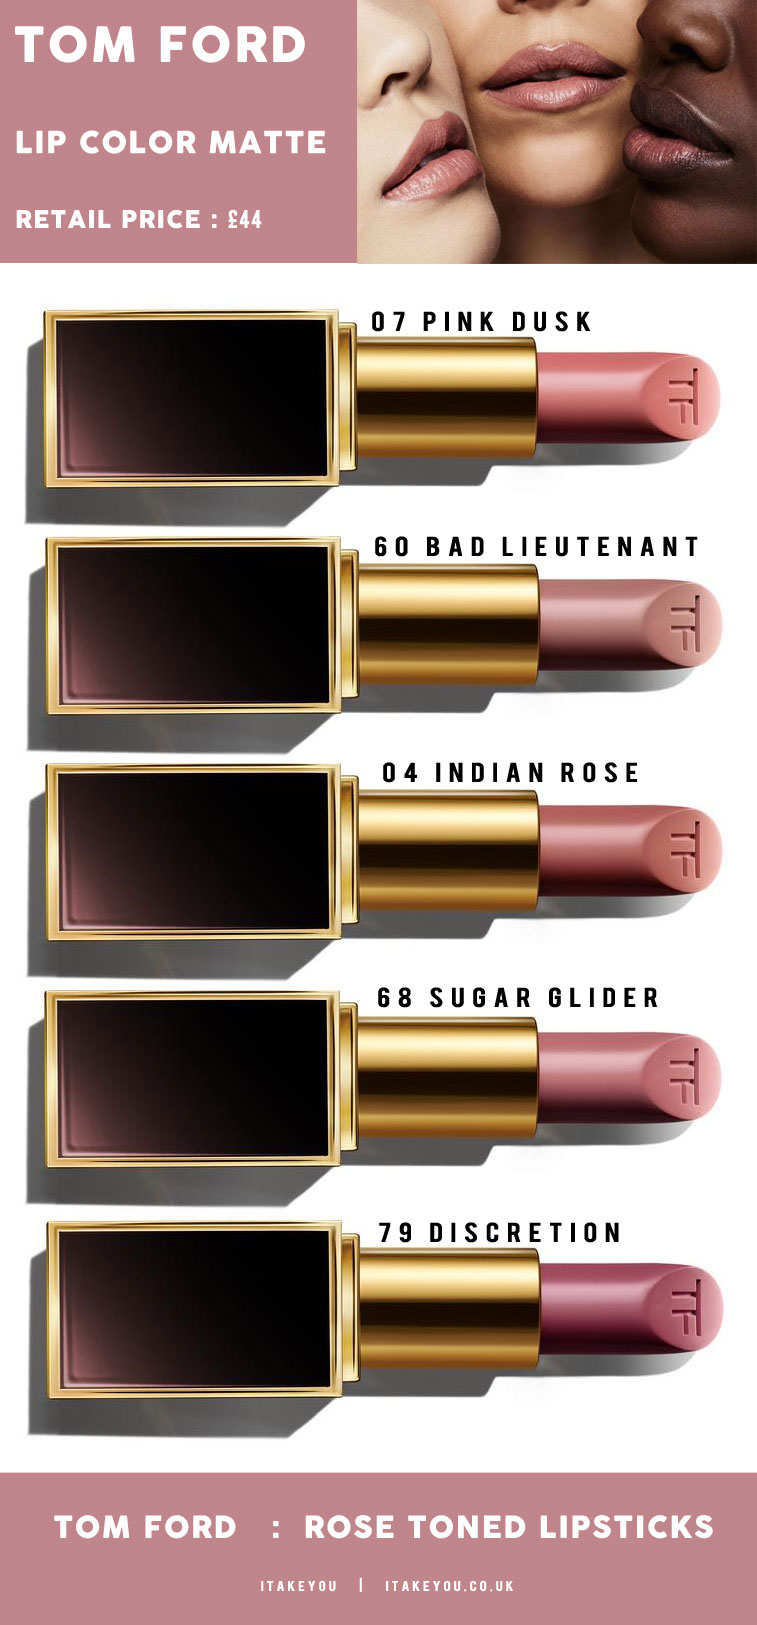 Rose Toned Lipsticks from Tom Ford